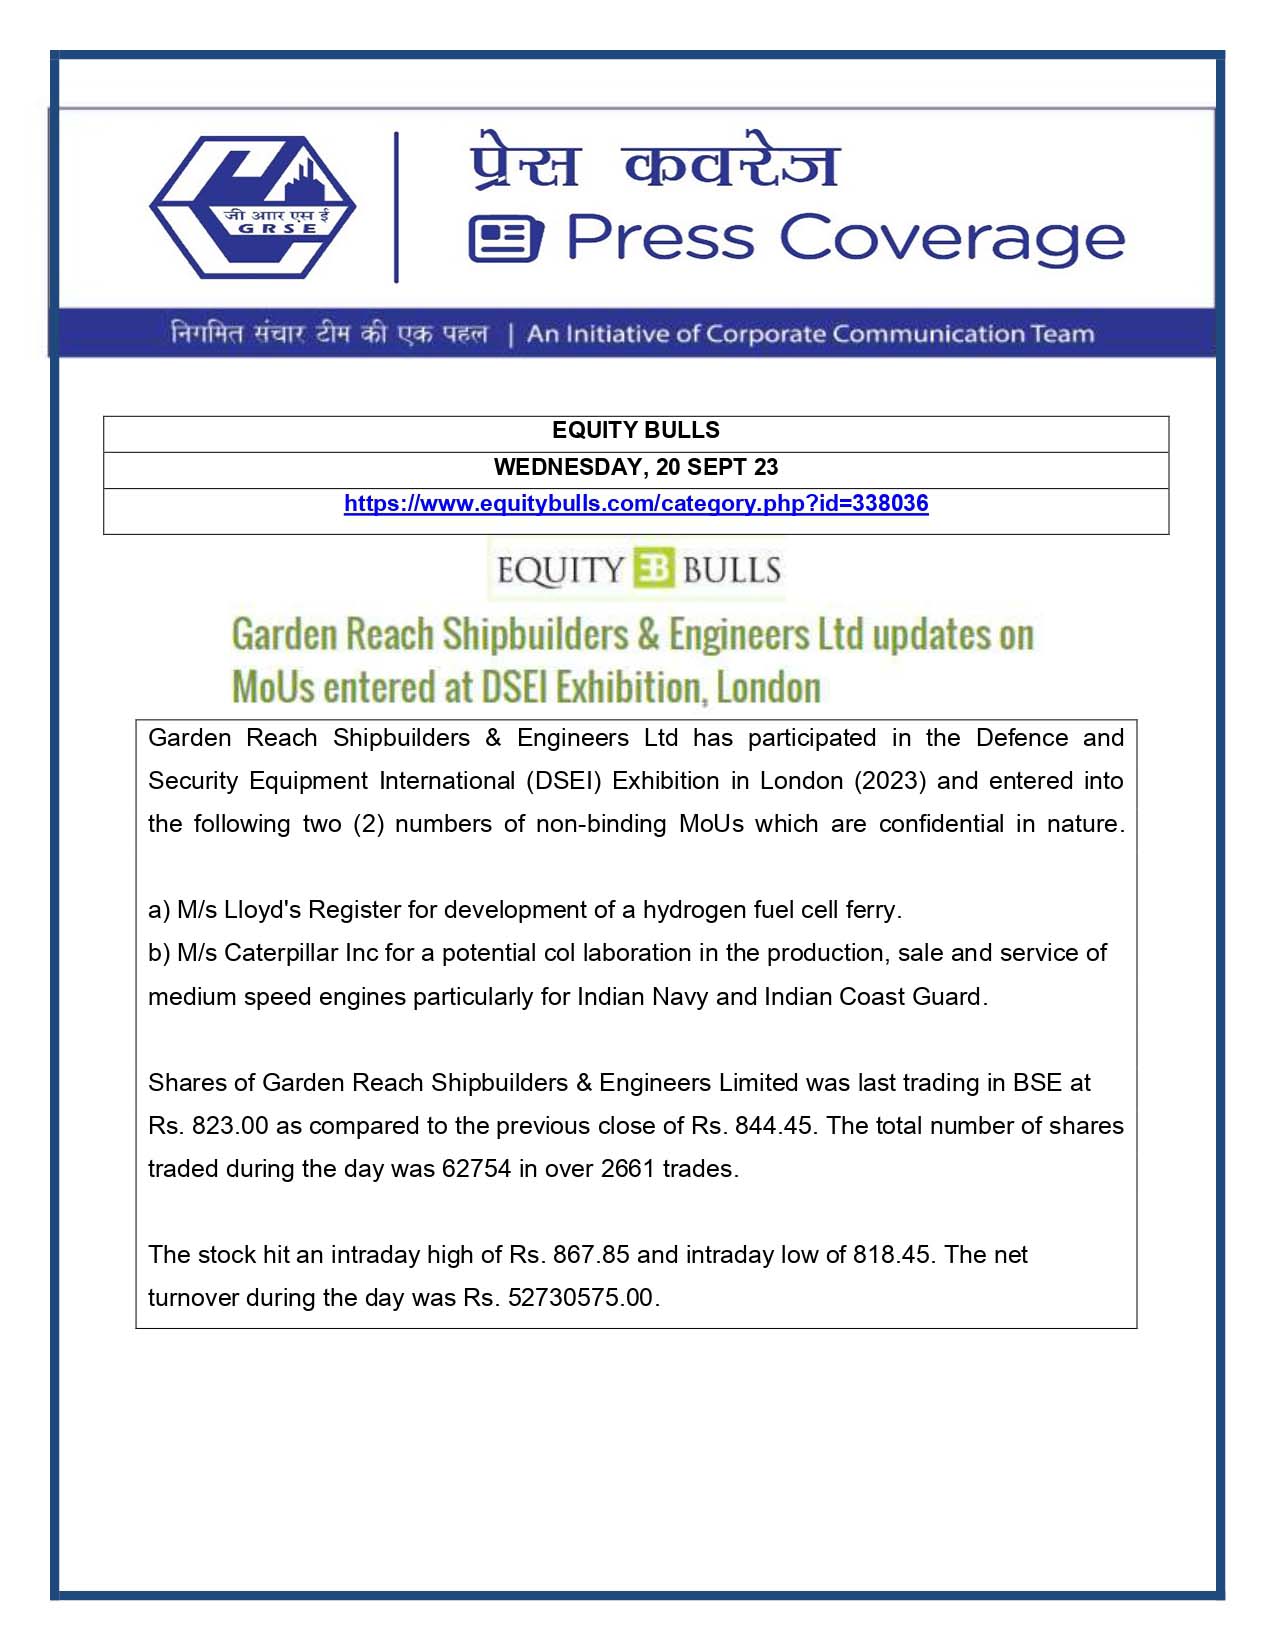 Press Coverage : Equity Bulls, 20 Sep 23 : GRSE updates on MoU entered at DSEI Exhibition, London